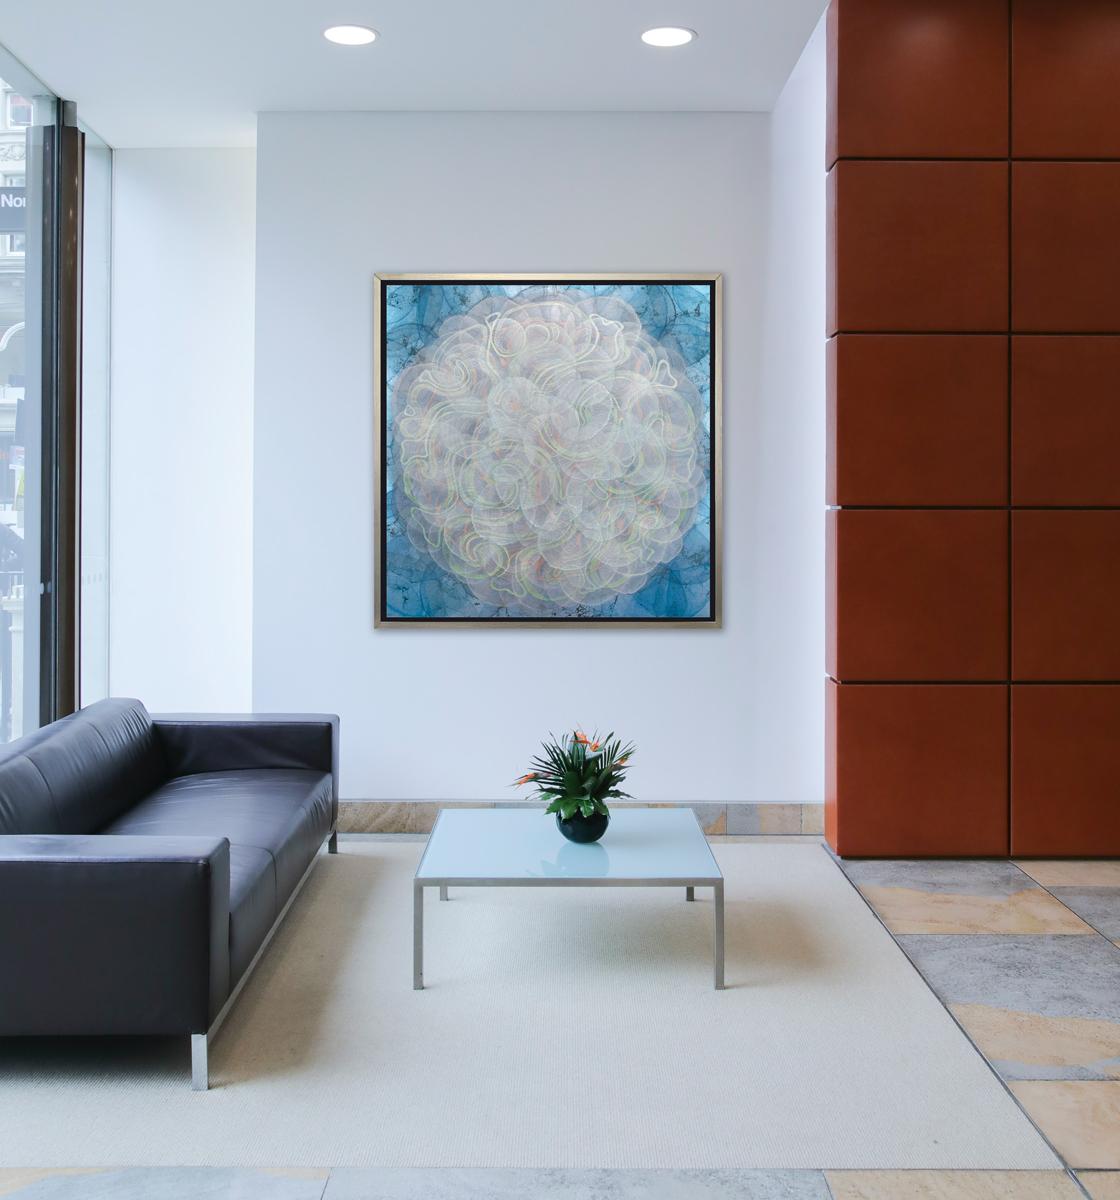 This abstract geometric limited edition print by Roger Mudre features a large circle shape at the center of the composition, composed of swirling green, orange, and silvery white lines, and a cool blue perimeter. 

This Limited Edition giclee print